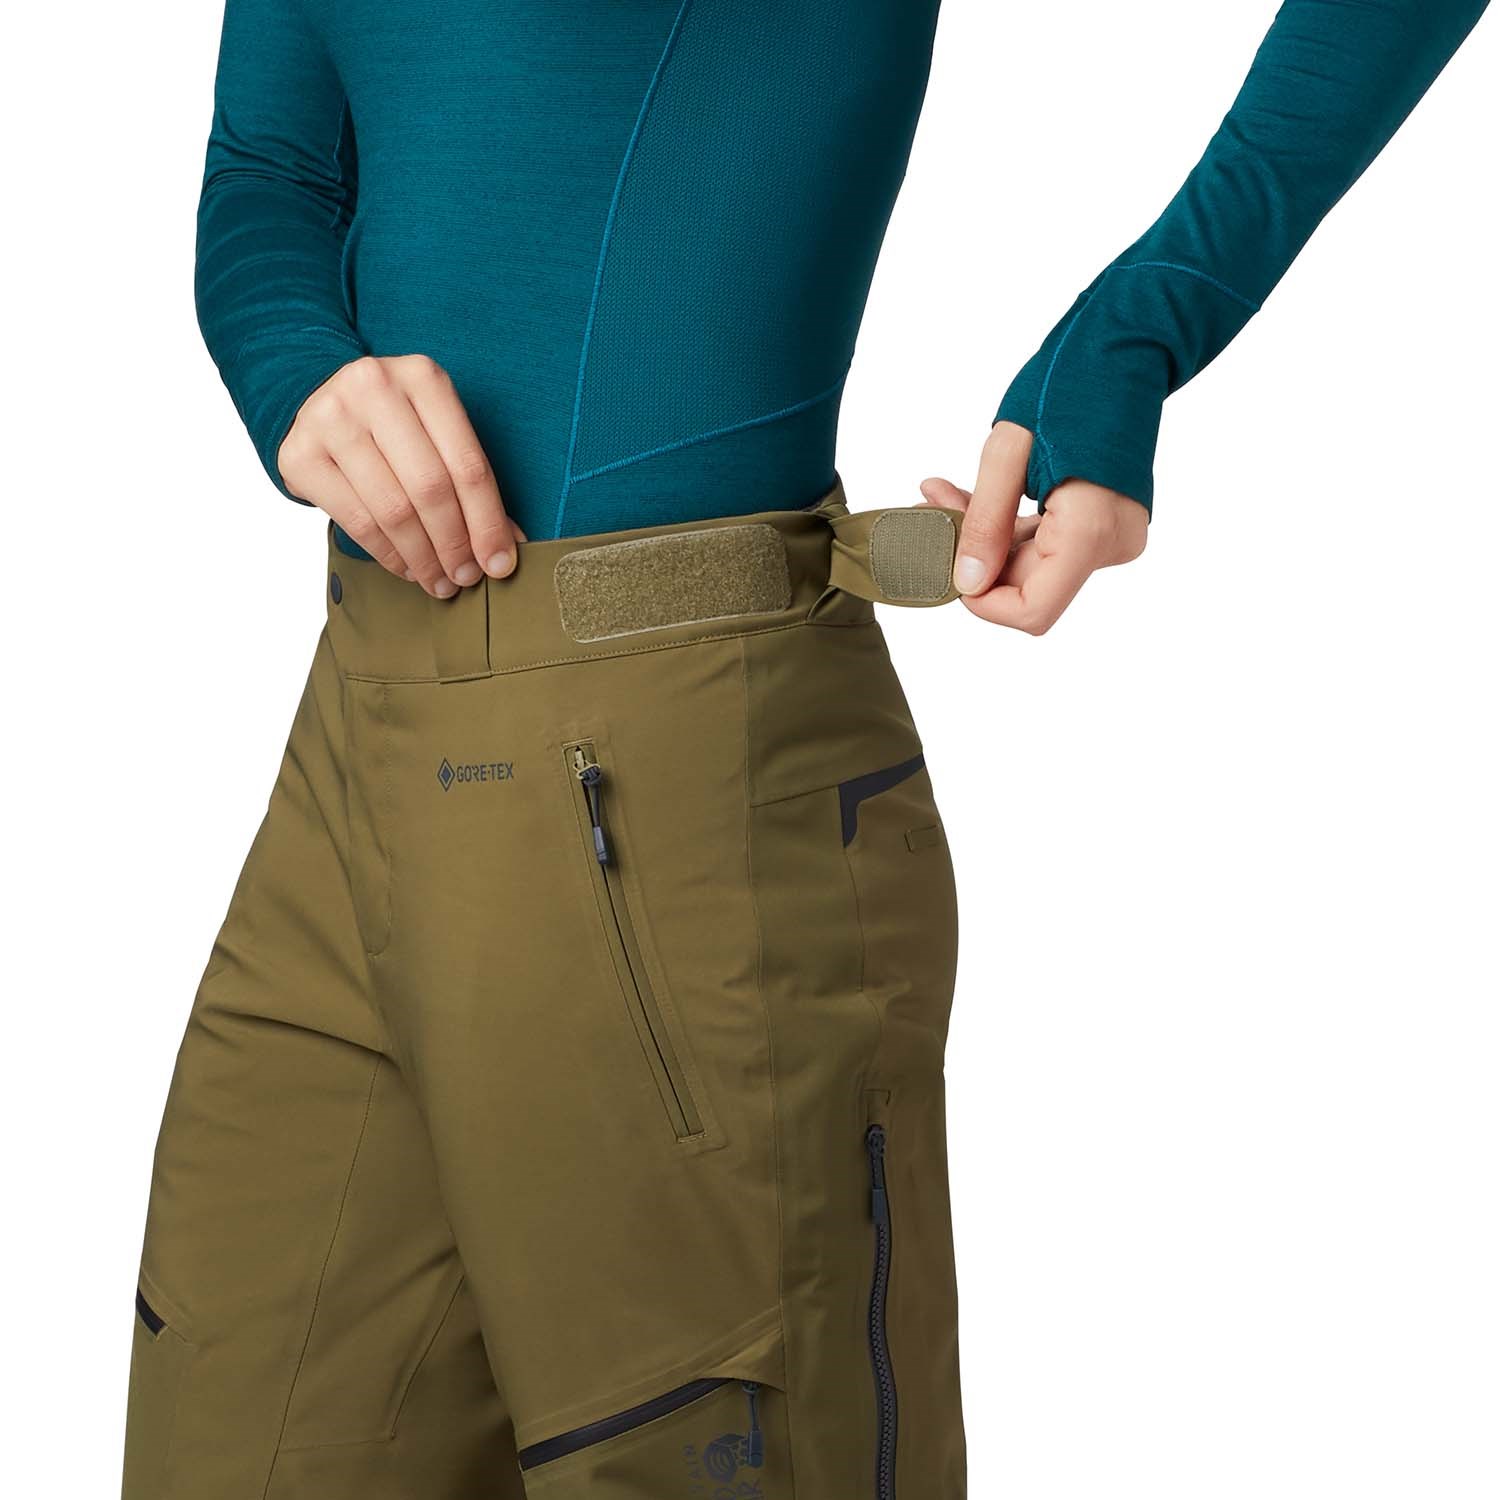 Women's Boundary Line Insulated Pants